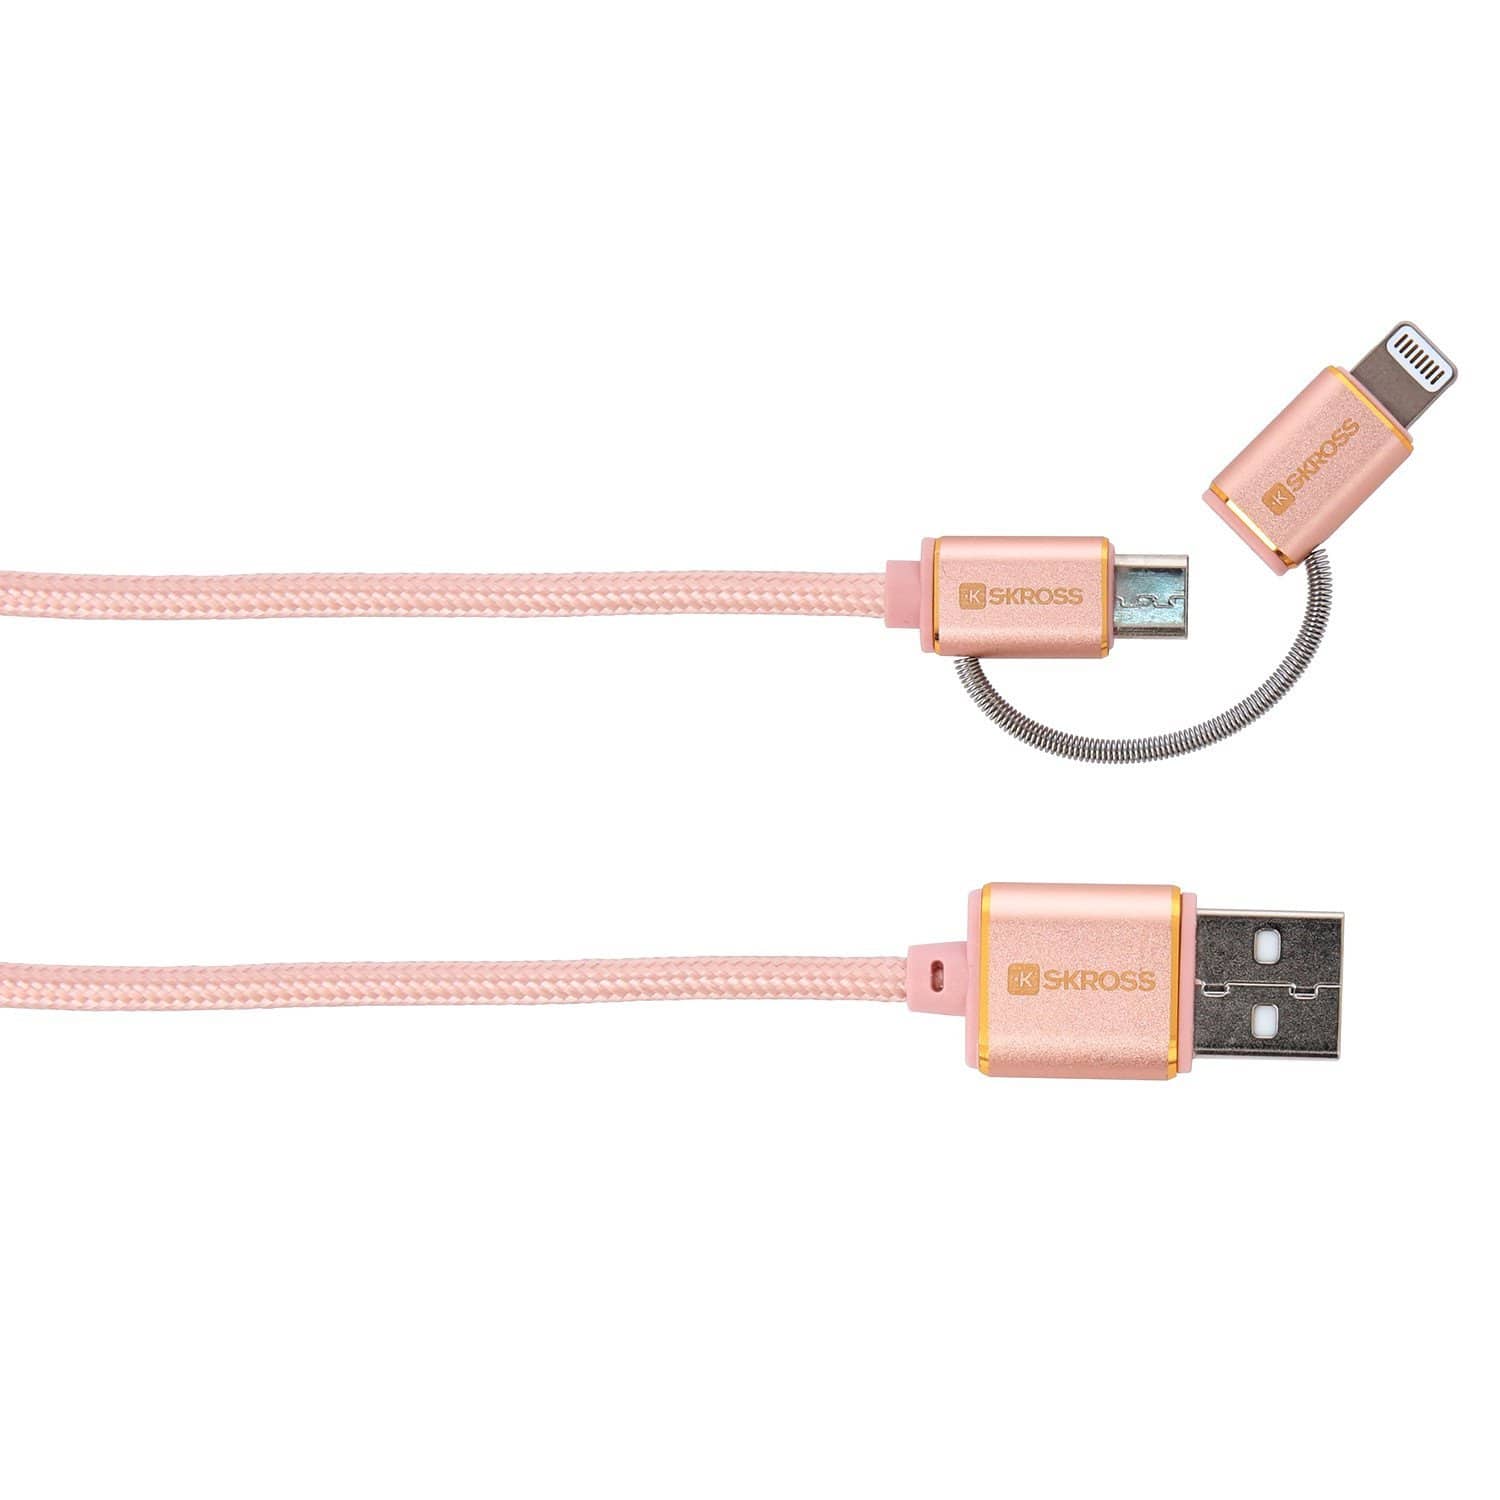 Skross Special Edition 2 in 1 Charge N Sync Micro USB Cable with Lightning Connector - Rose Gold - 2700251 - Jashanmal Home